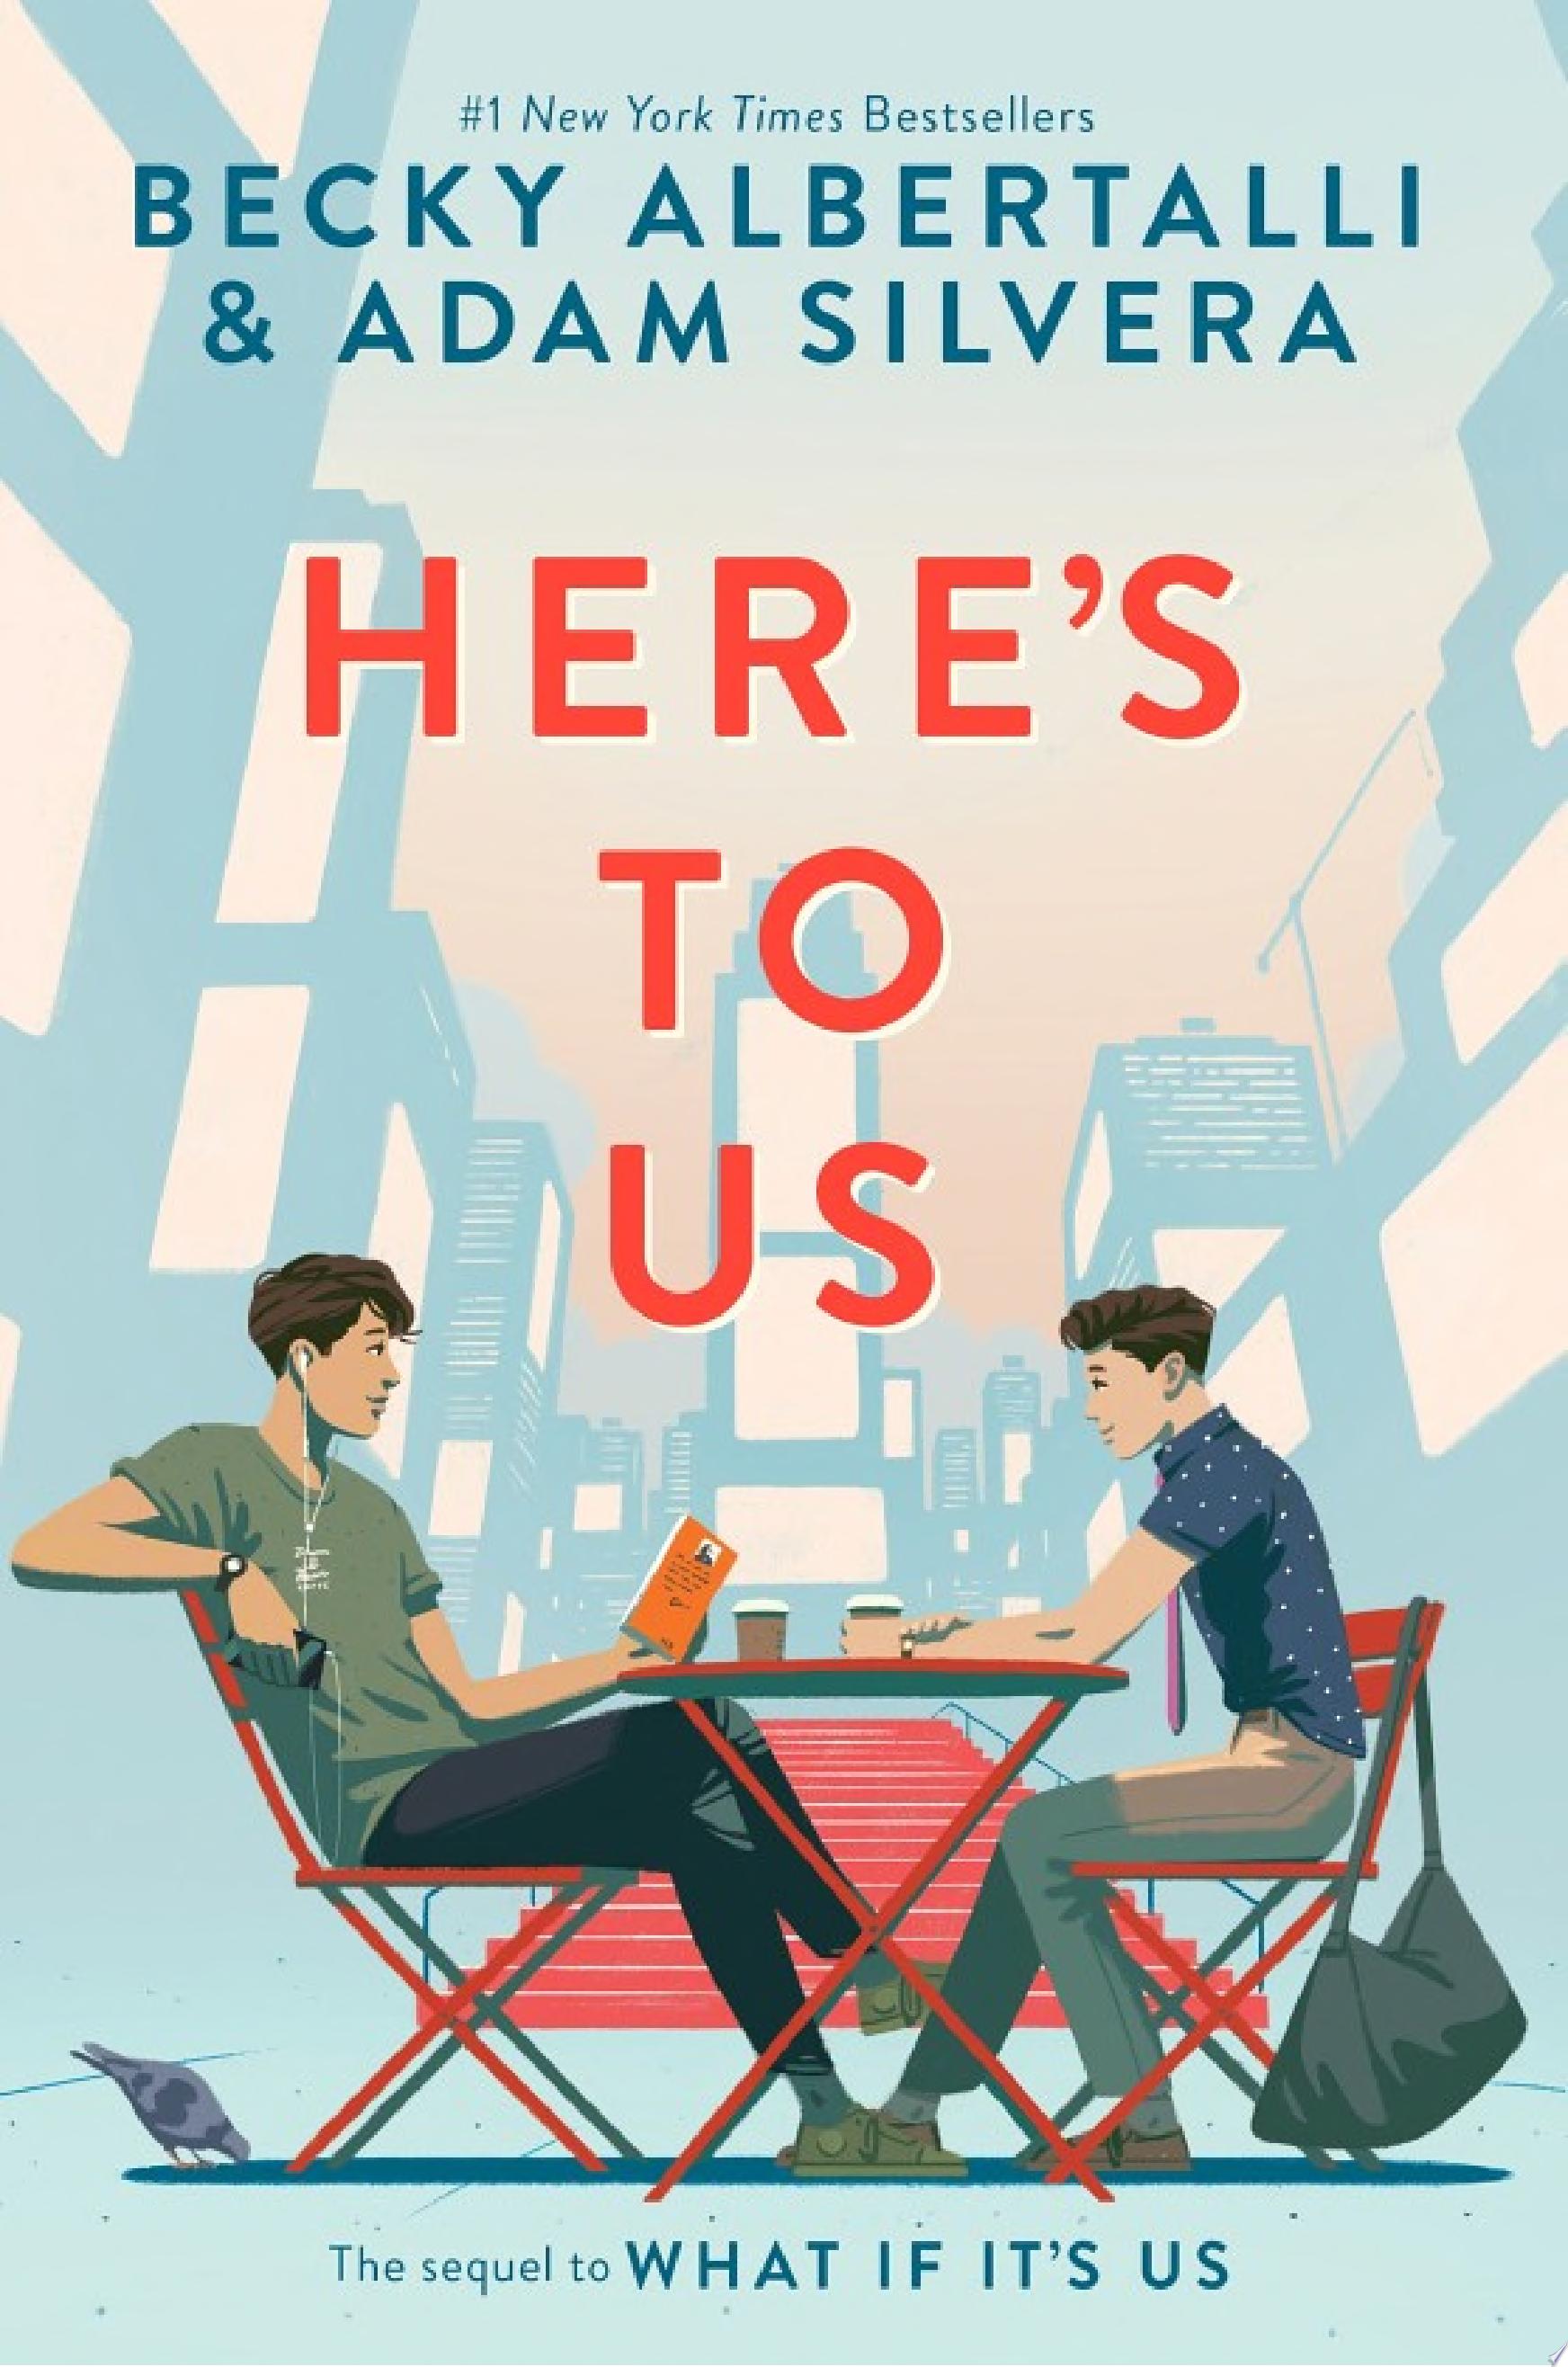 Image for "Here's to Us"